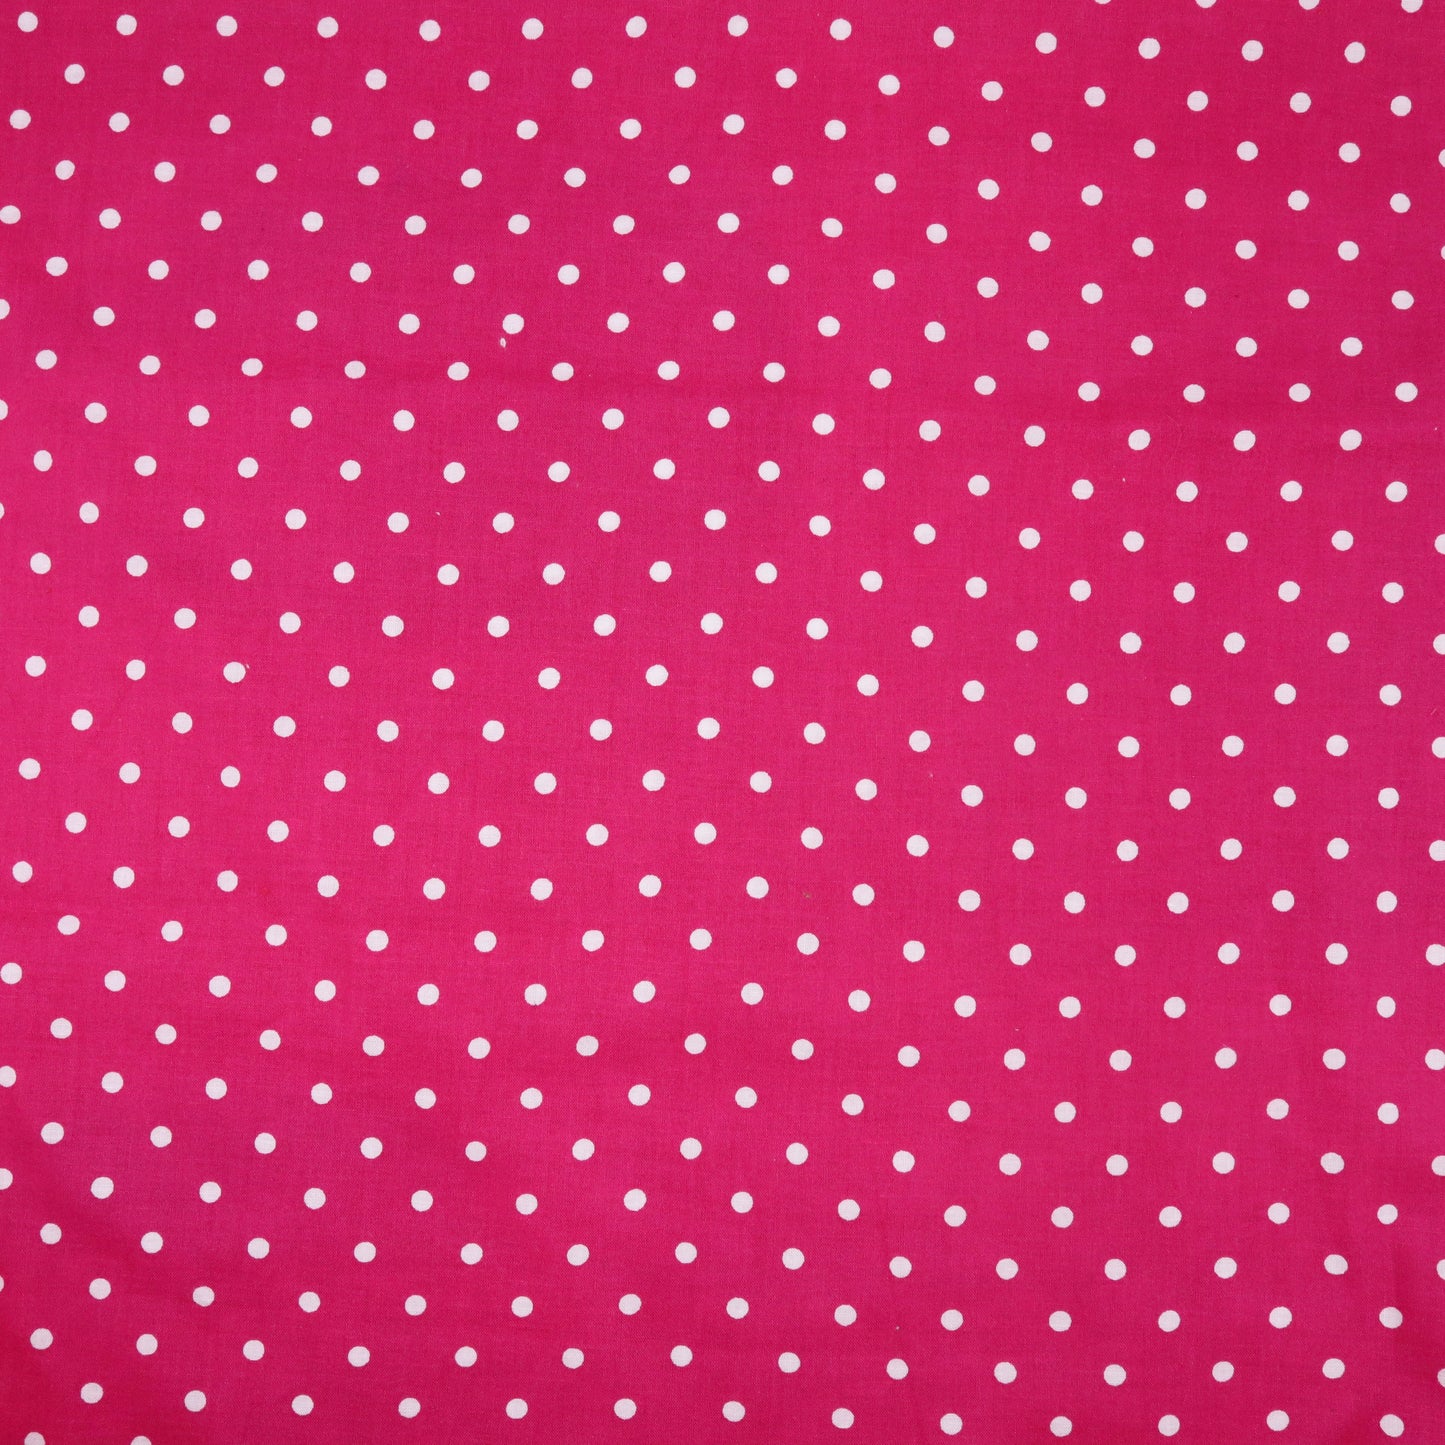 Pretty Polka Dots on Pink - Quilting Cotton